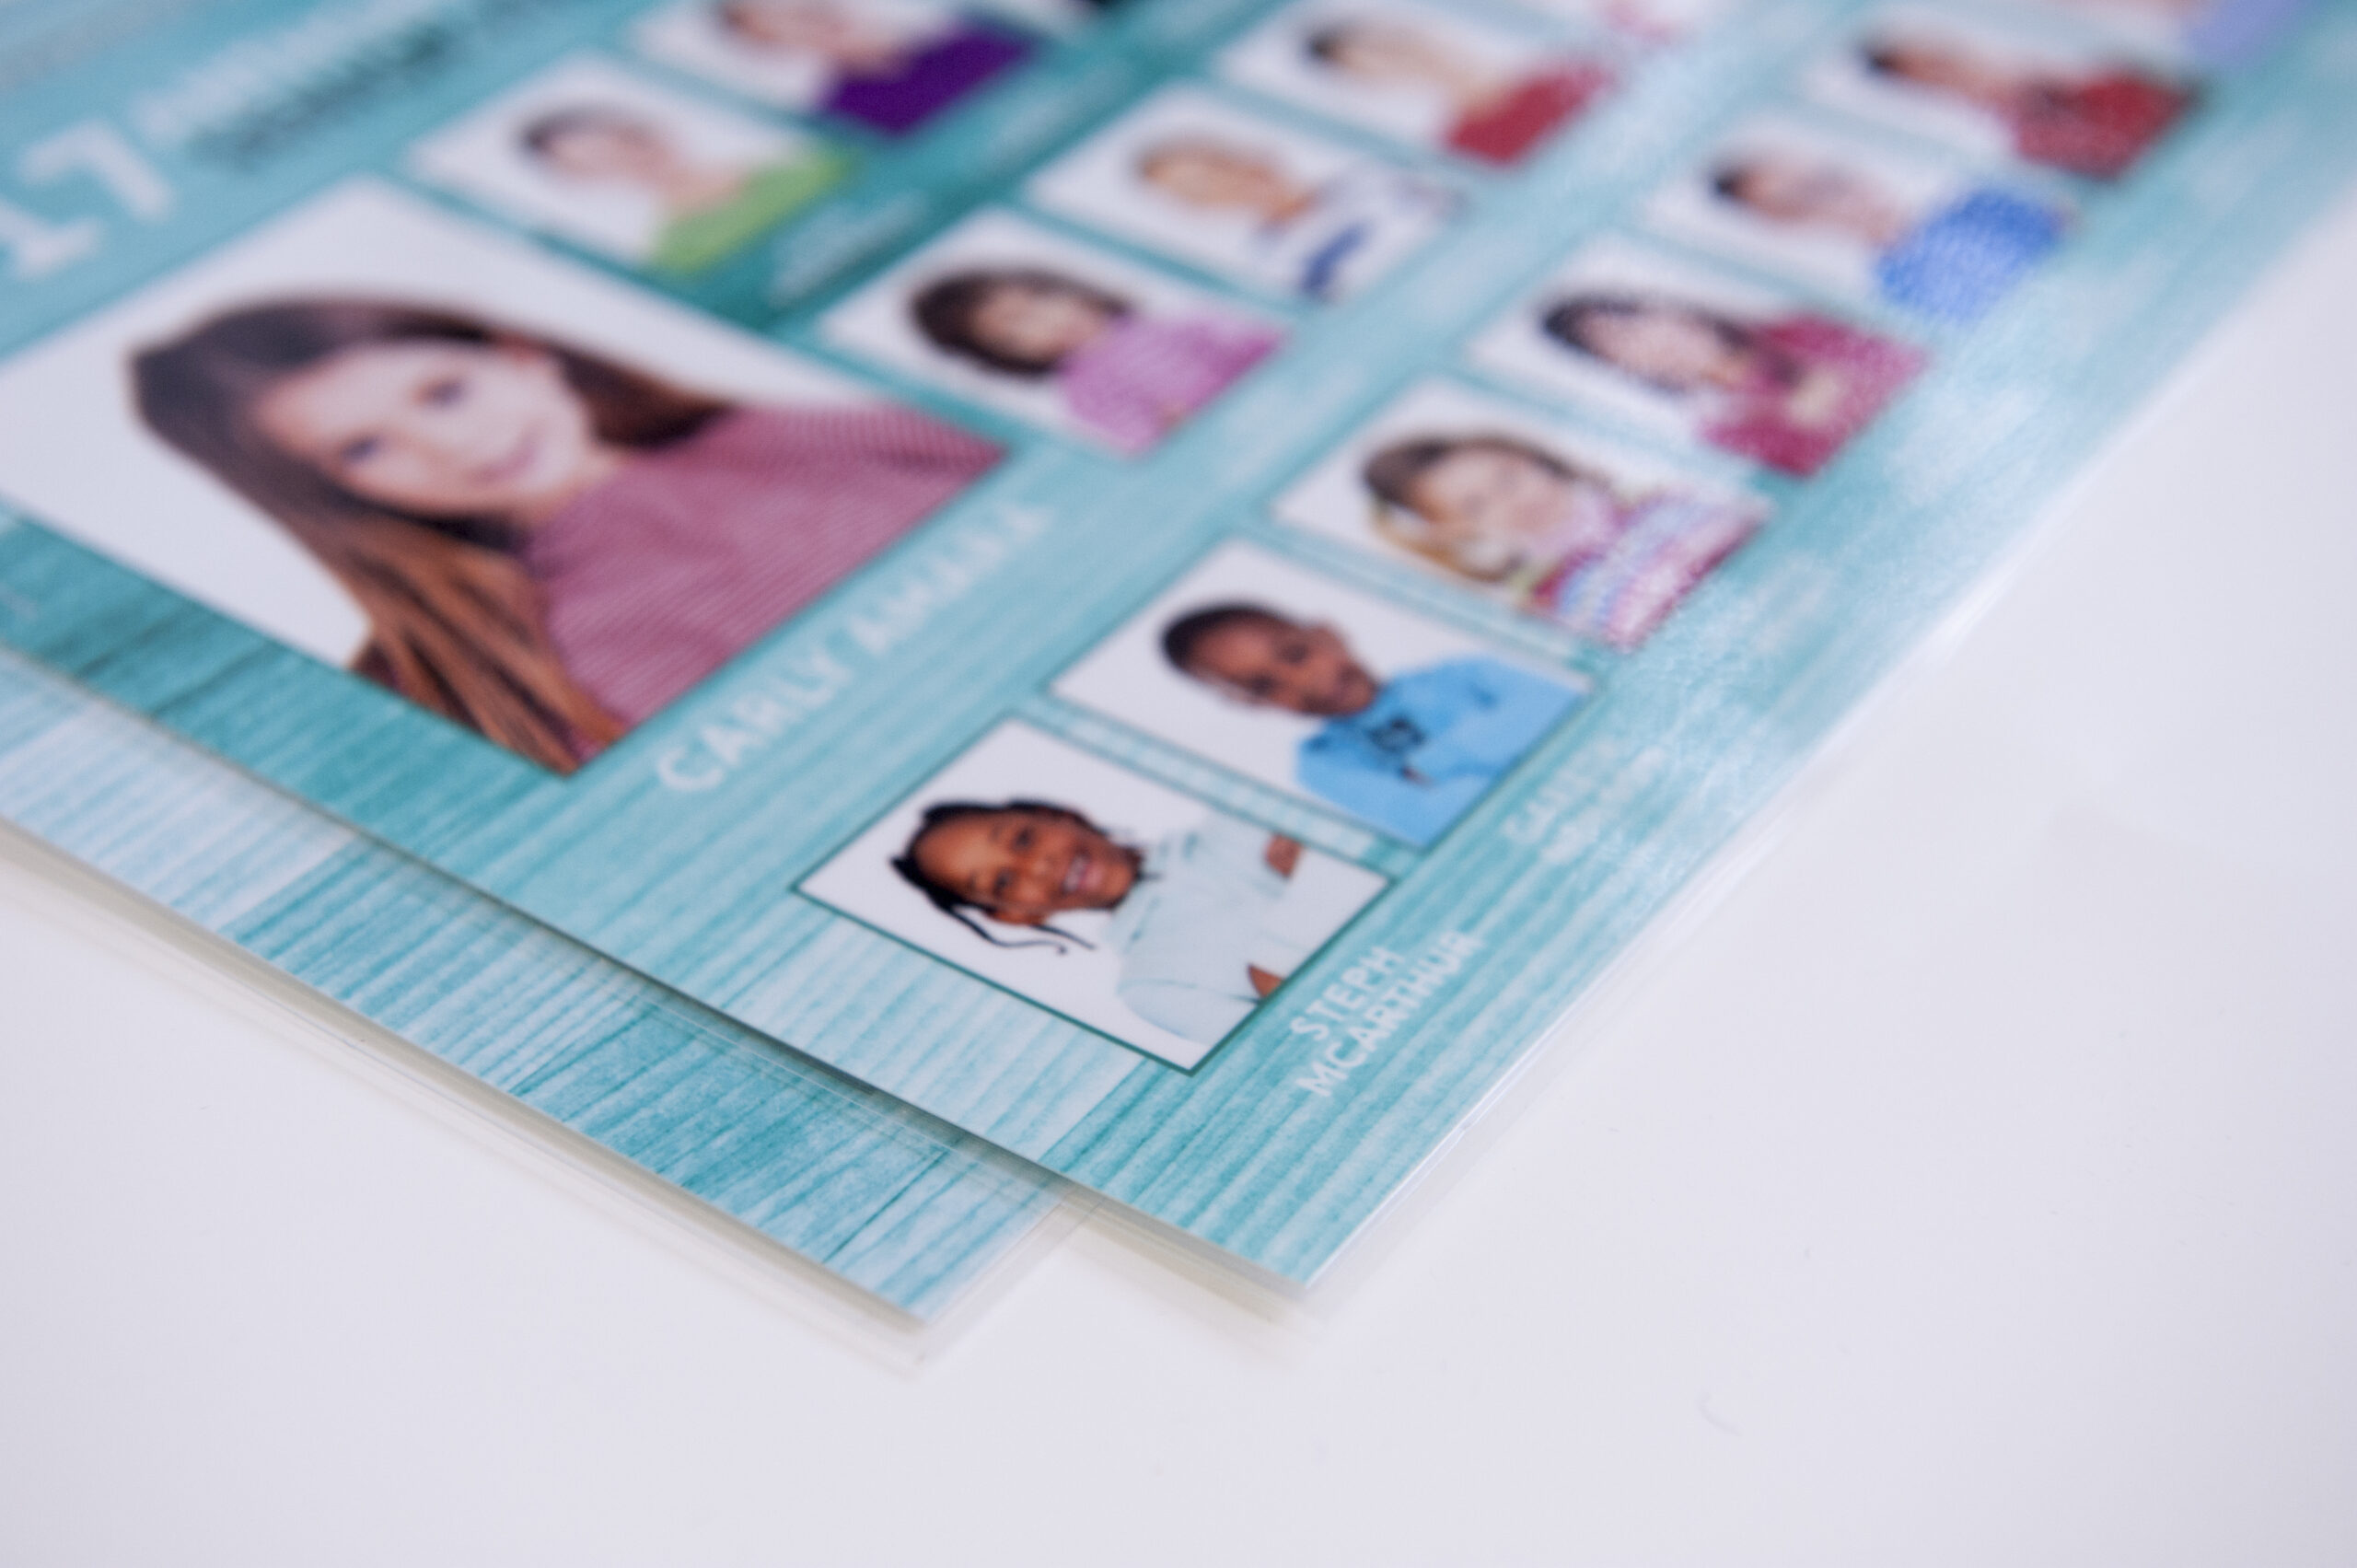 close up of school composite photos with a gloss encapsulated laminated